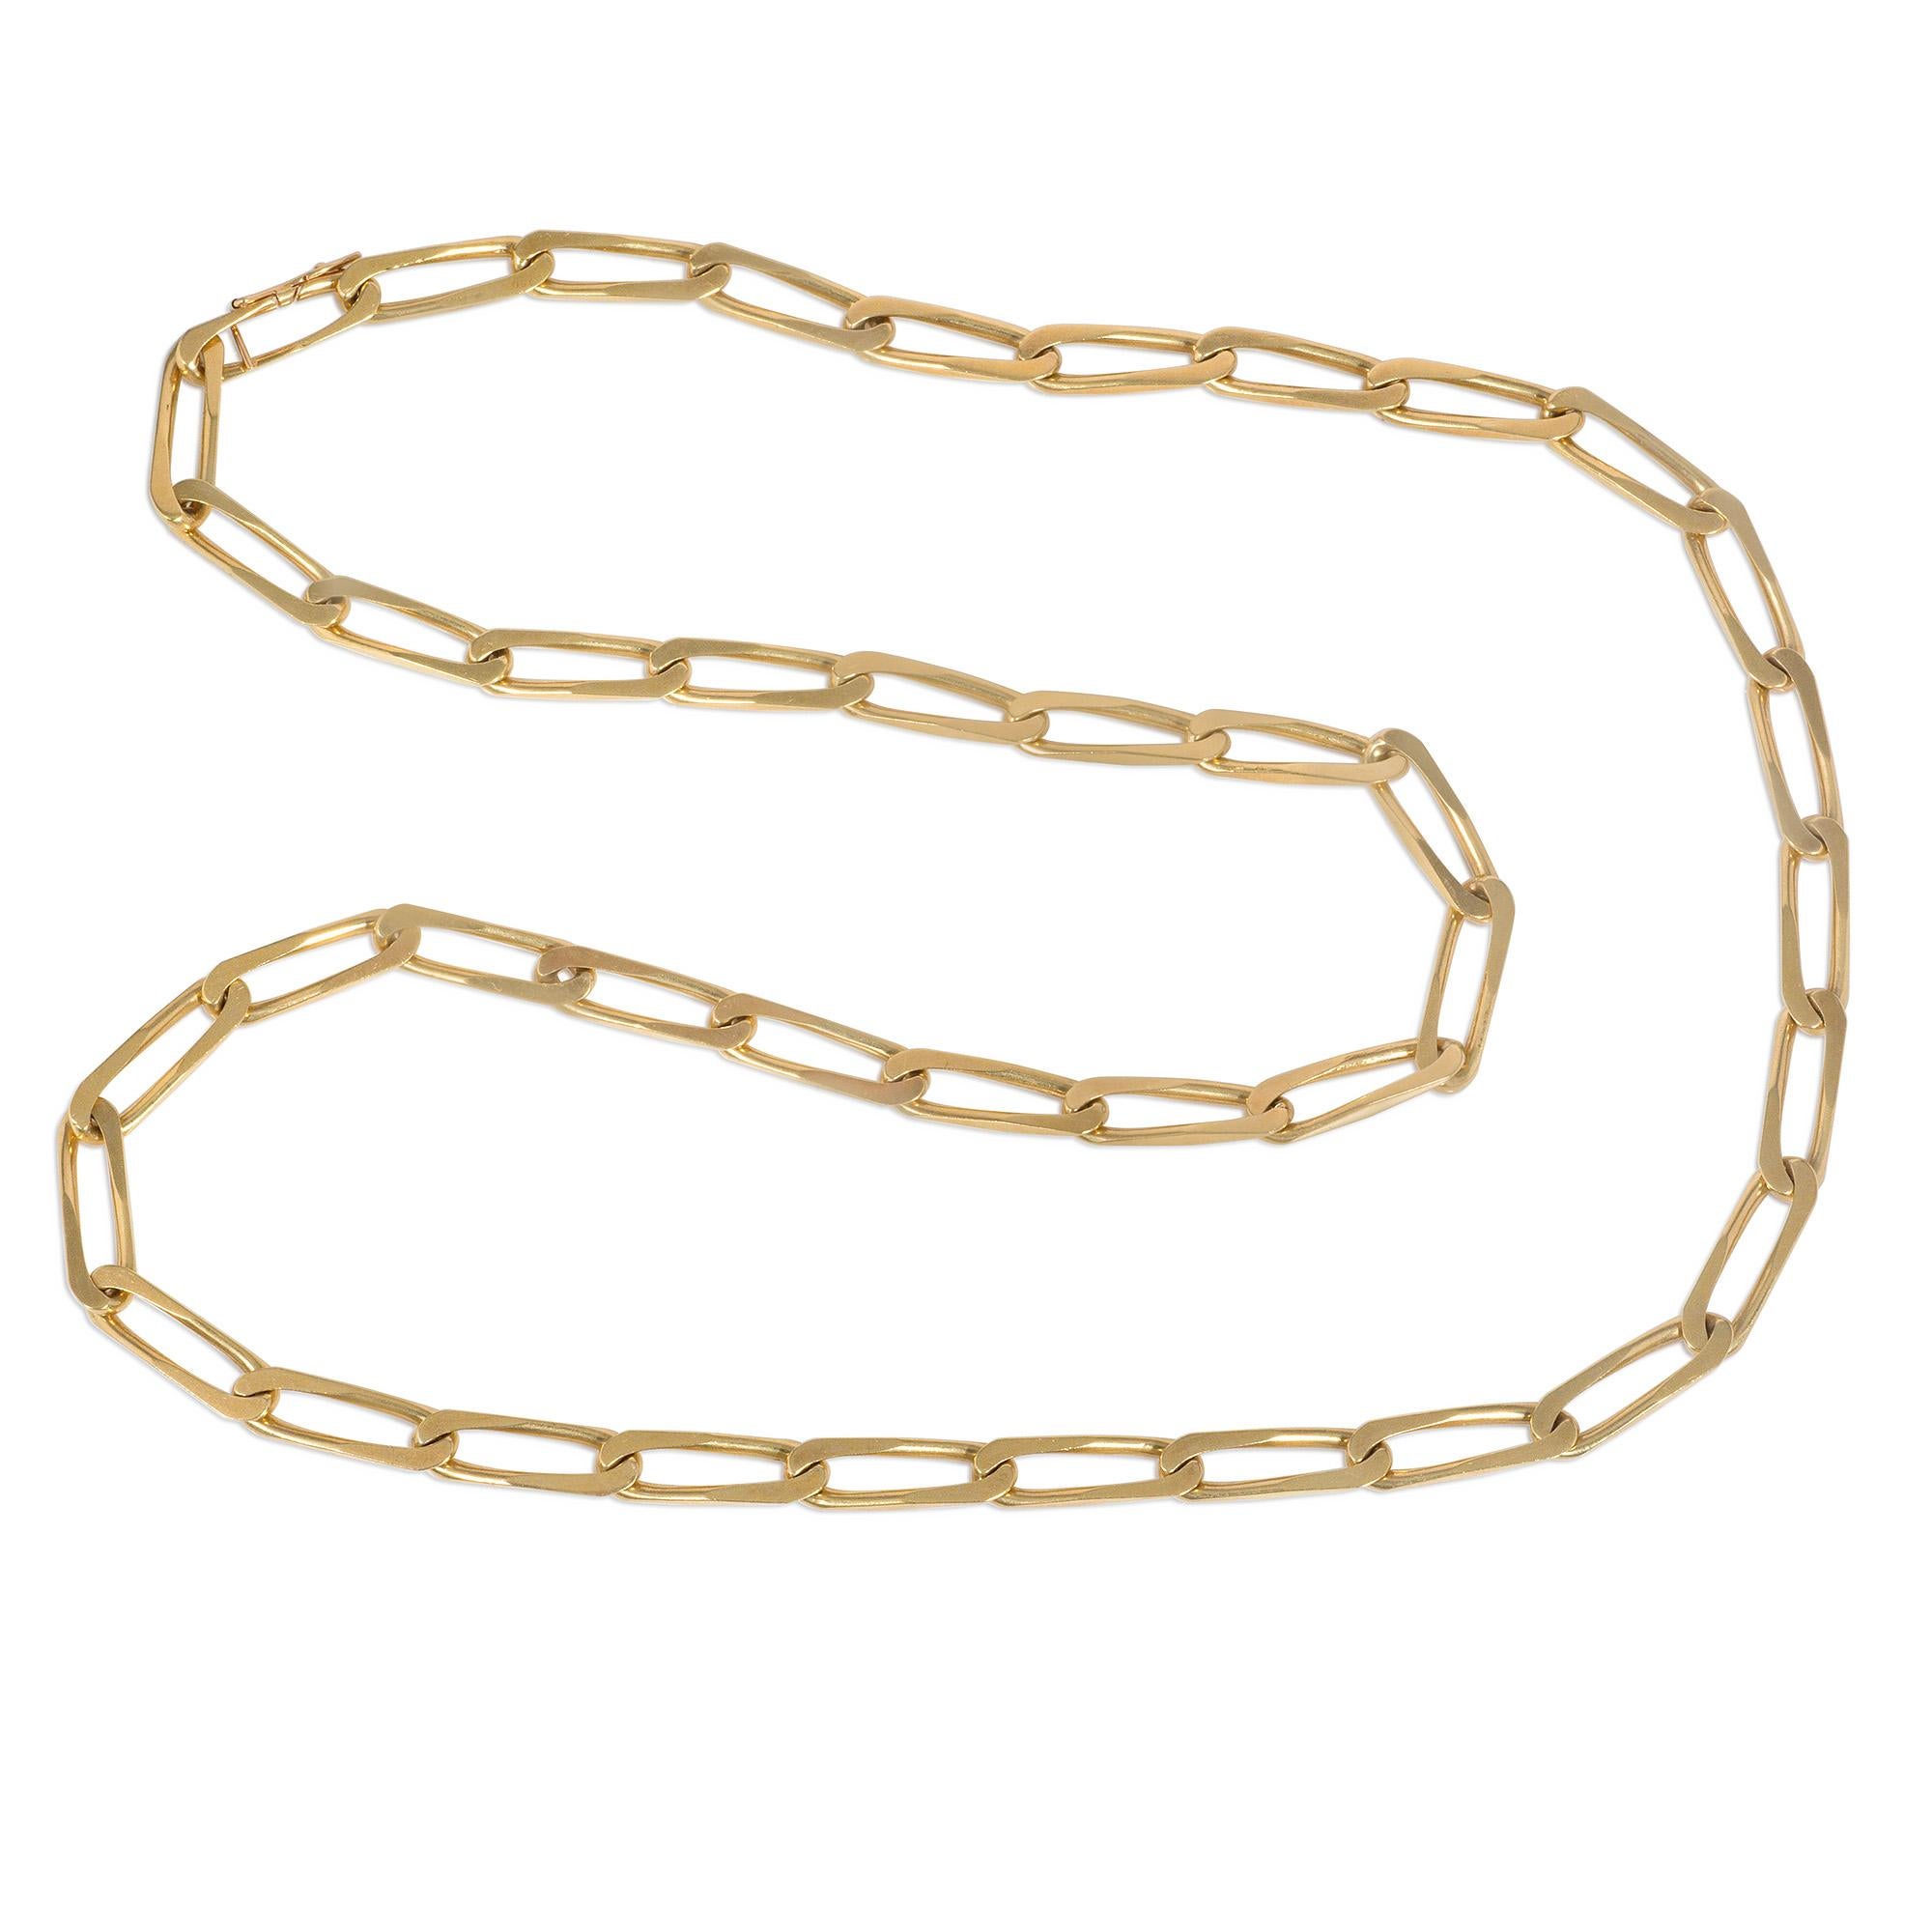 A 1970s gold chain of paper clip links with clasp of like design, in 18k.  Cartier, Paris. #46309.
May be doubled and could easily suspend charms/pendants, or a brooch may be attached as a decorative accent

* Includes Kentshire's letter of